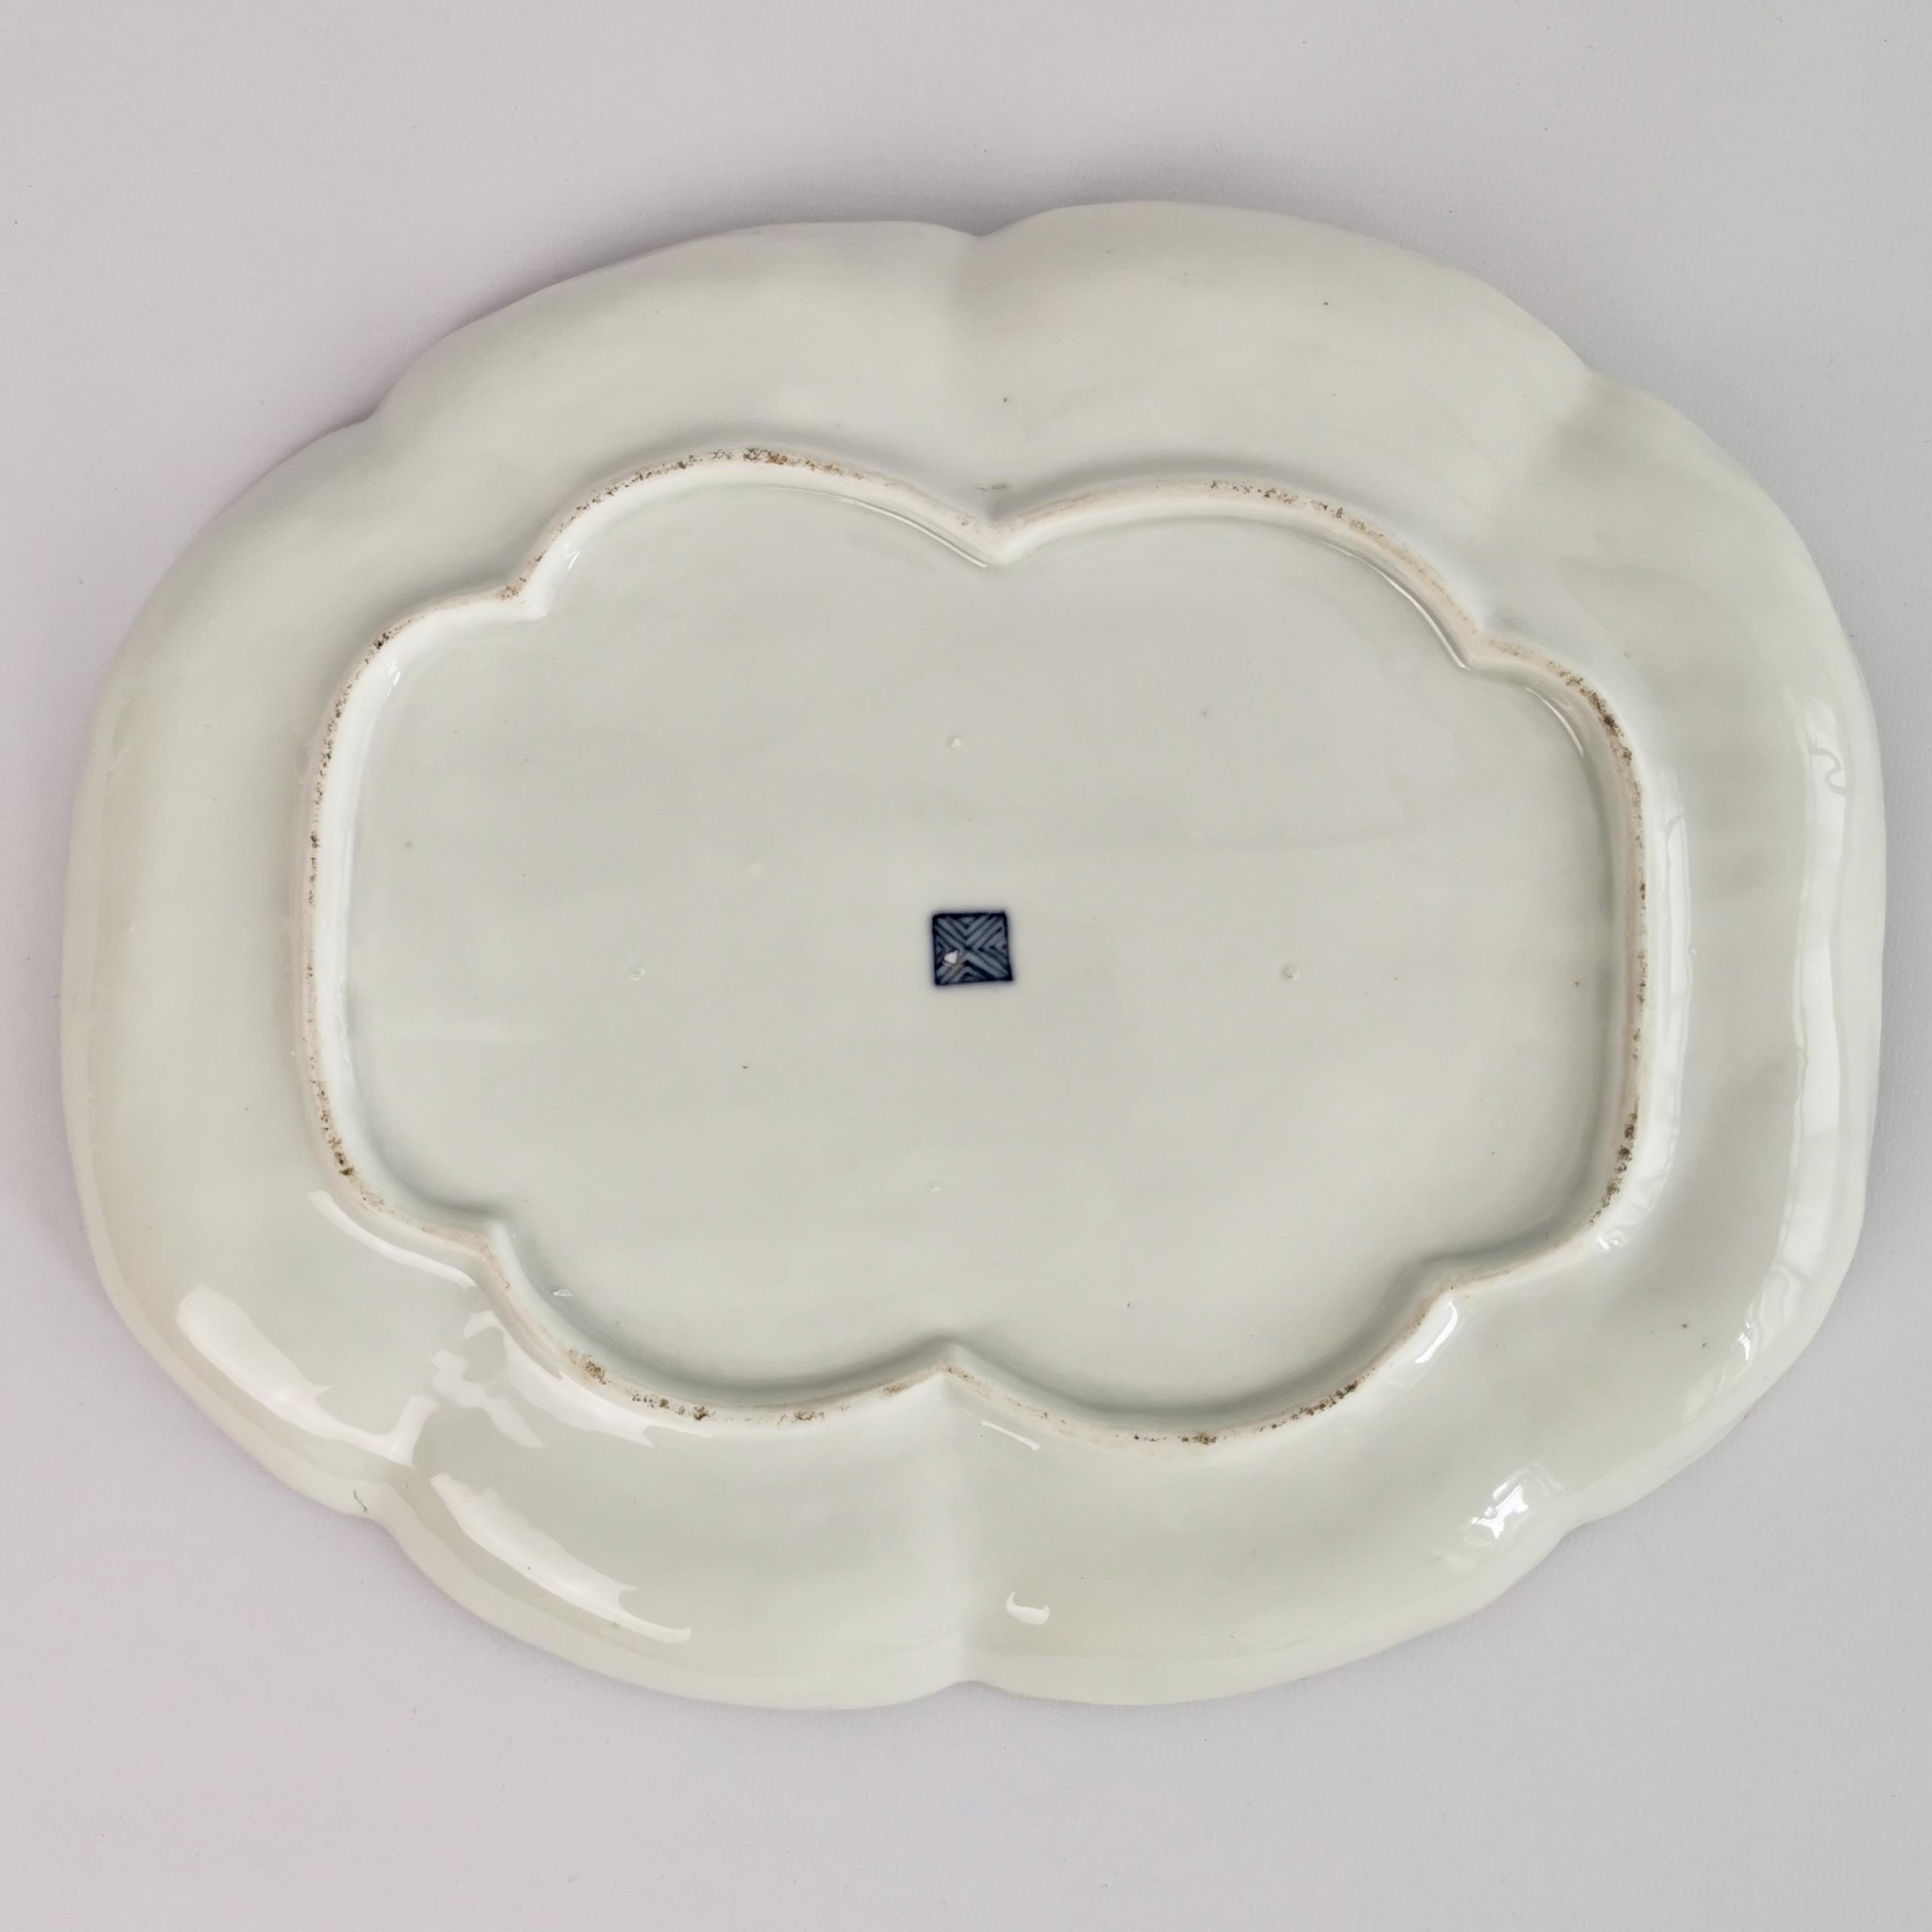 Edmé Samson Porcelain Cabaret Tray, Worcester Style Blue with Flowers, 19th C For Sale 2